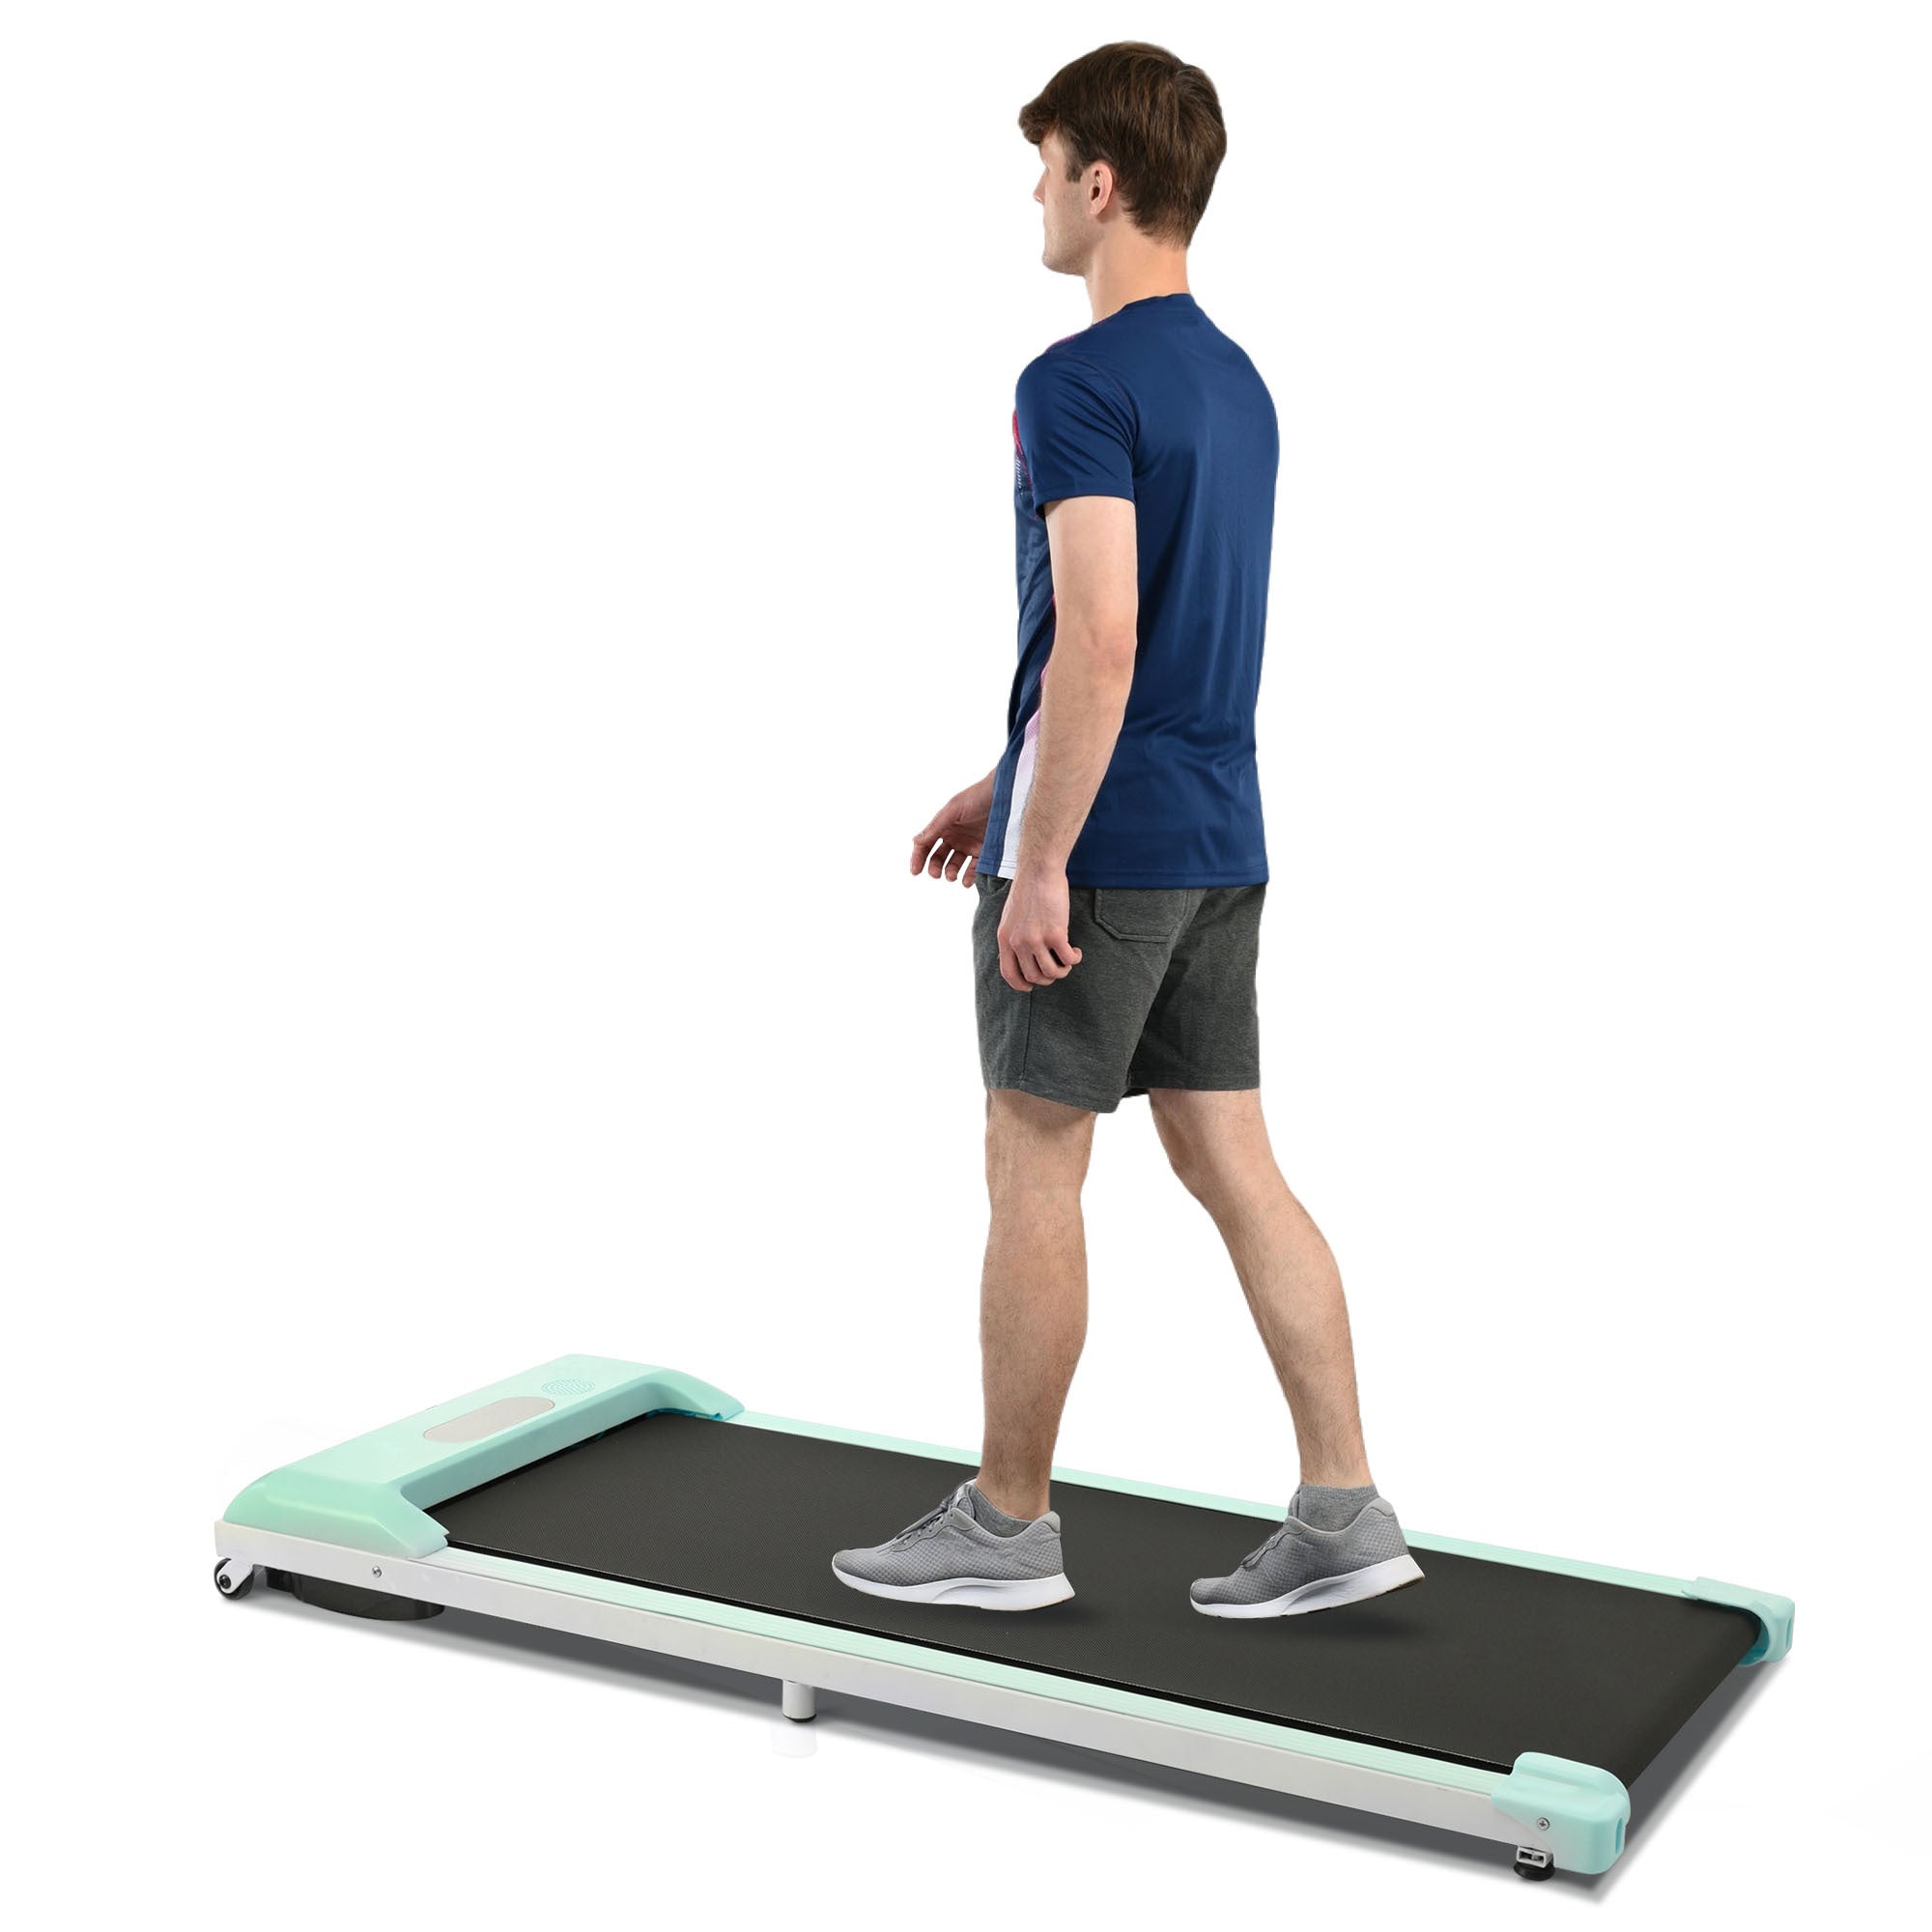 2 in 1 Under Desk Electric Treadmill 2.5HP, with green-metal